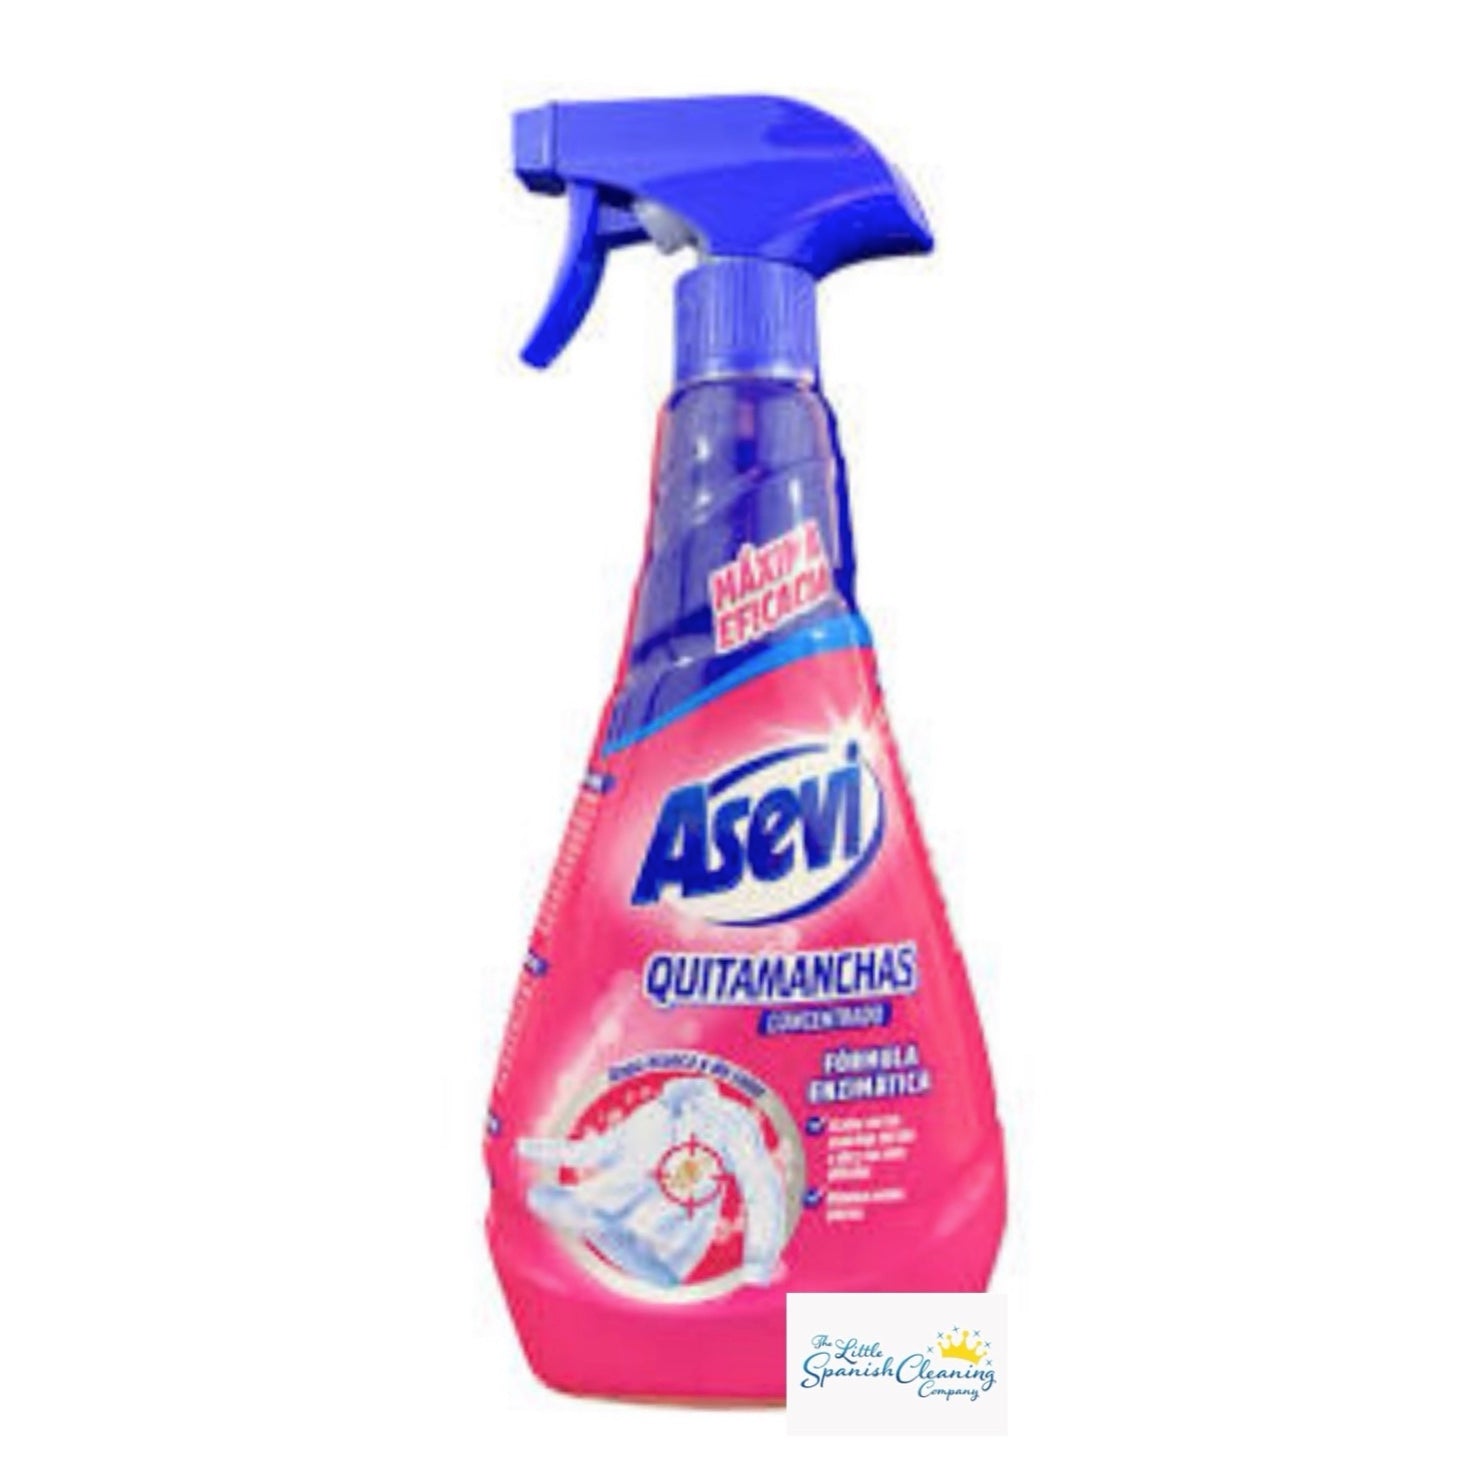 Asevi Stain Remover for Clothes - Quitamanchas